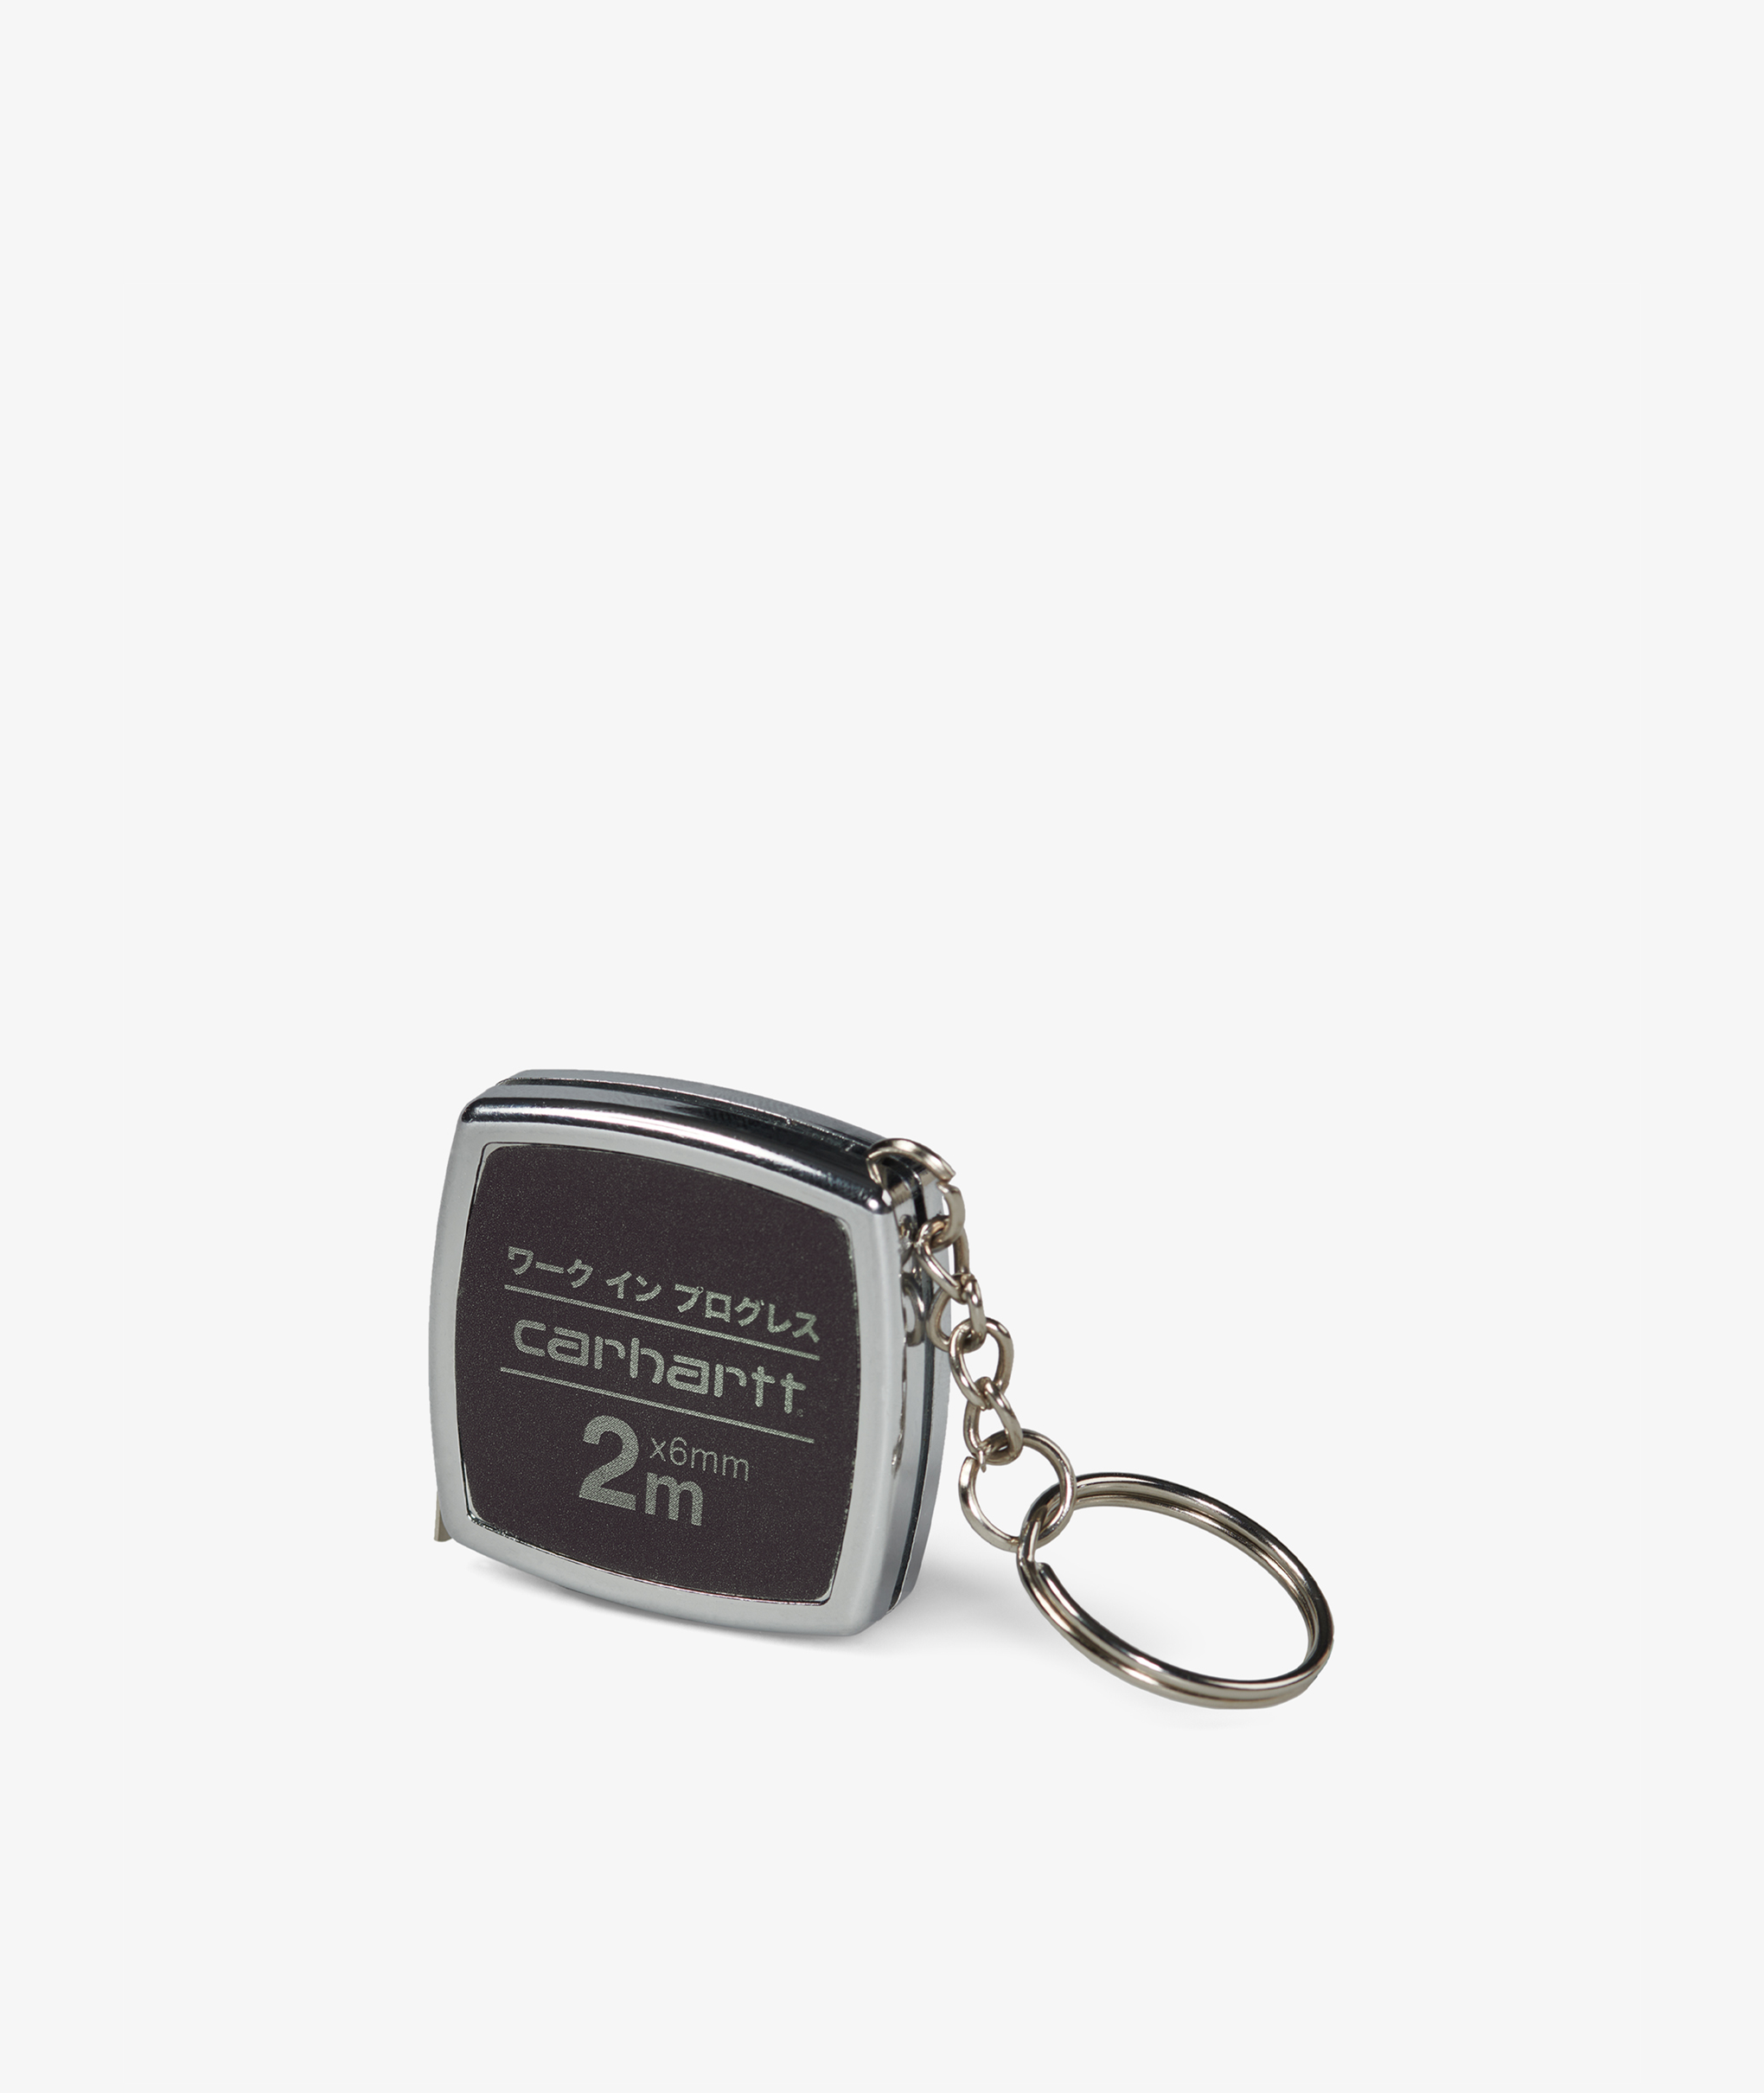 Norse Store  Shipping Worldwide - Carhartt WIP Measuring Tape